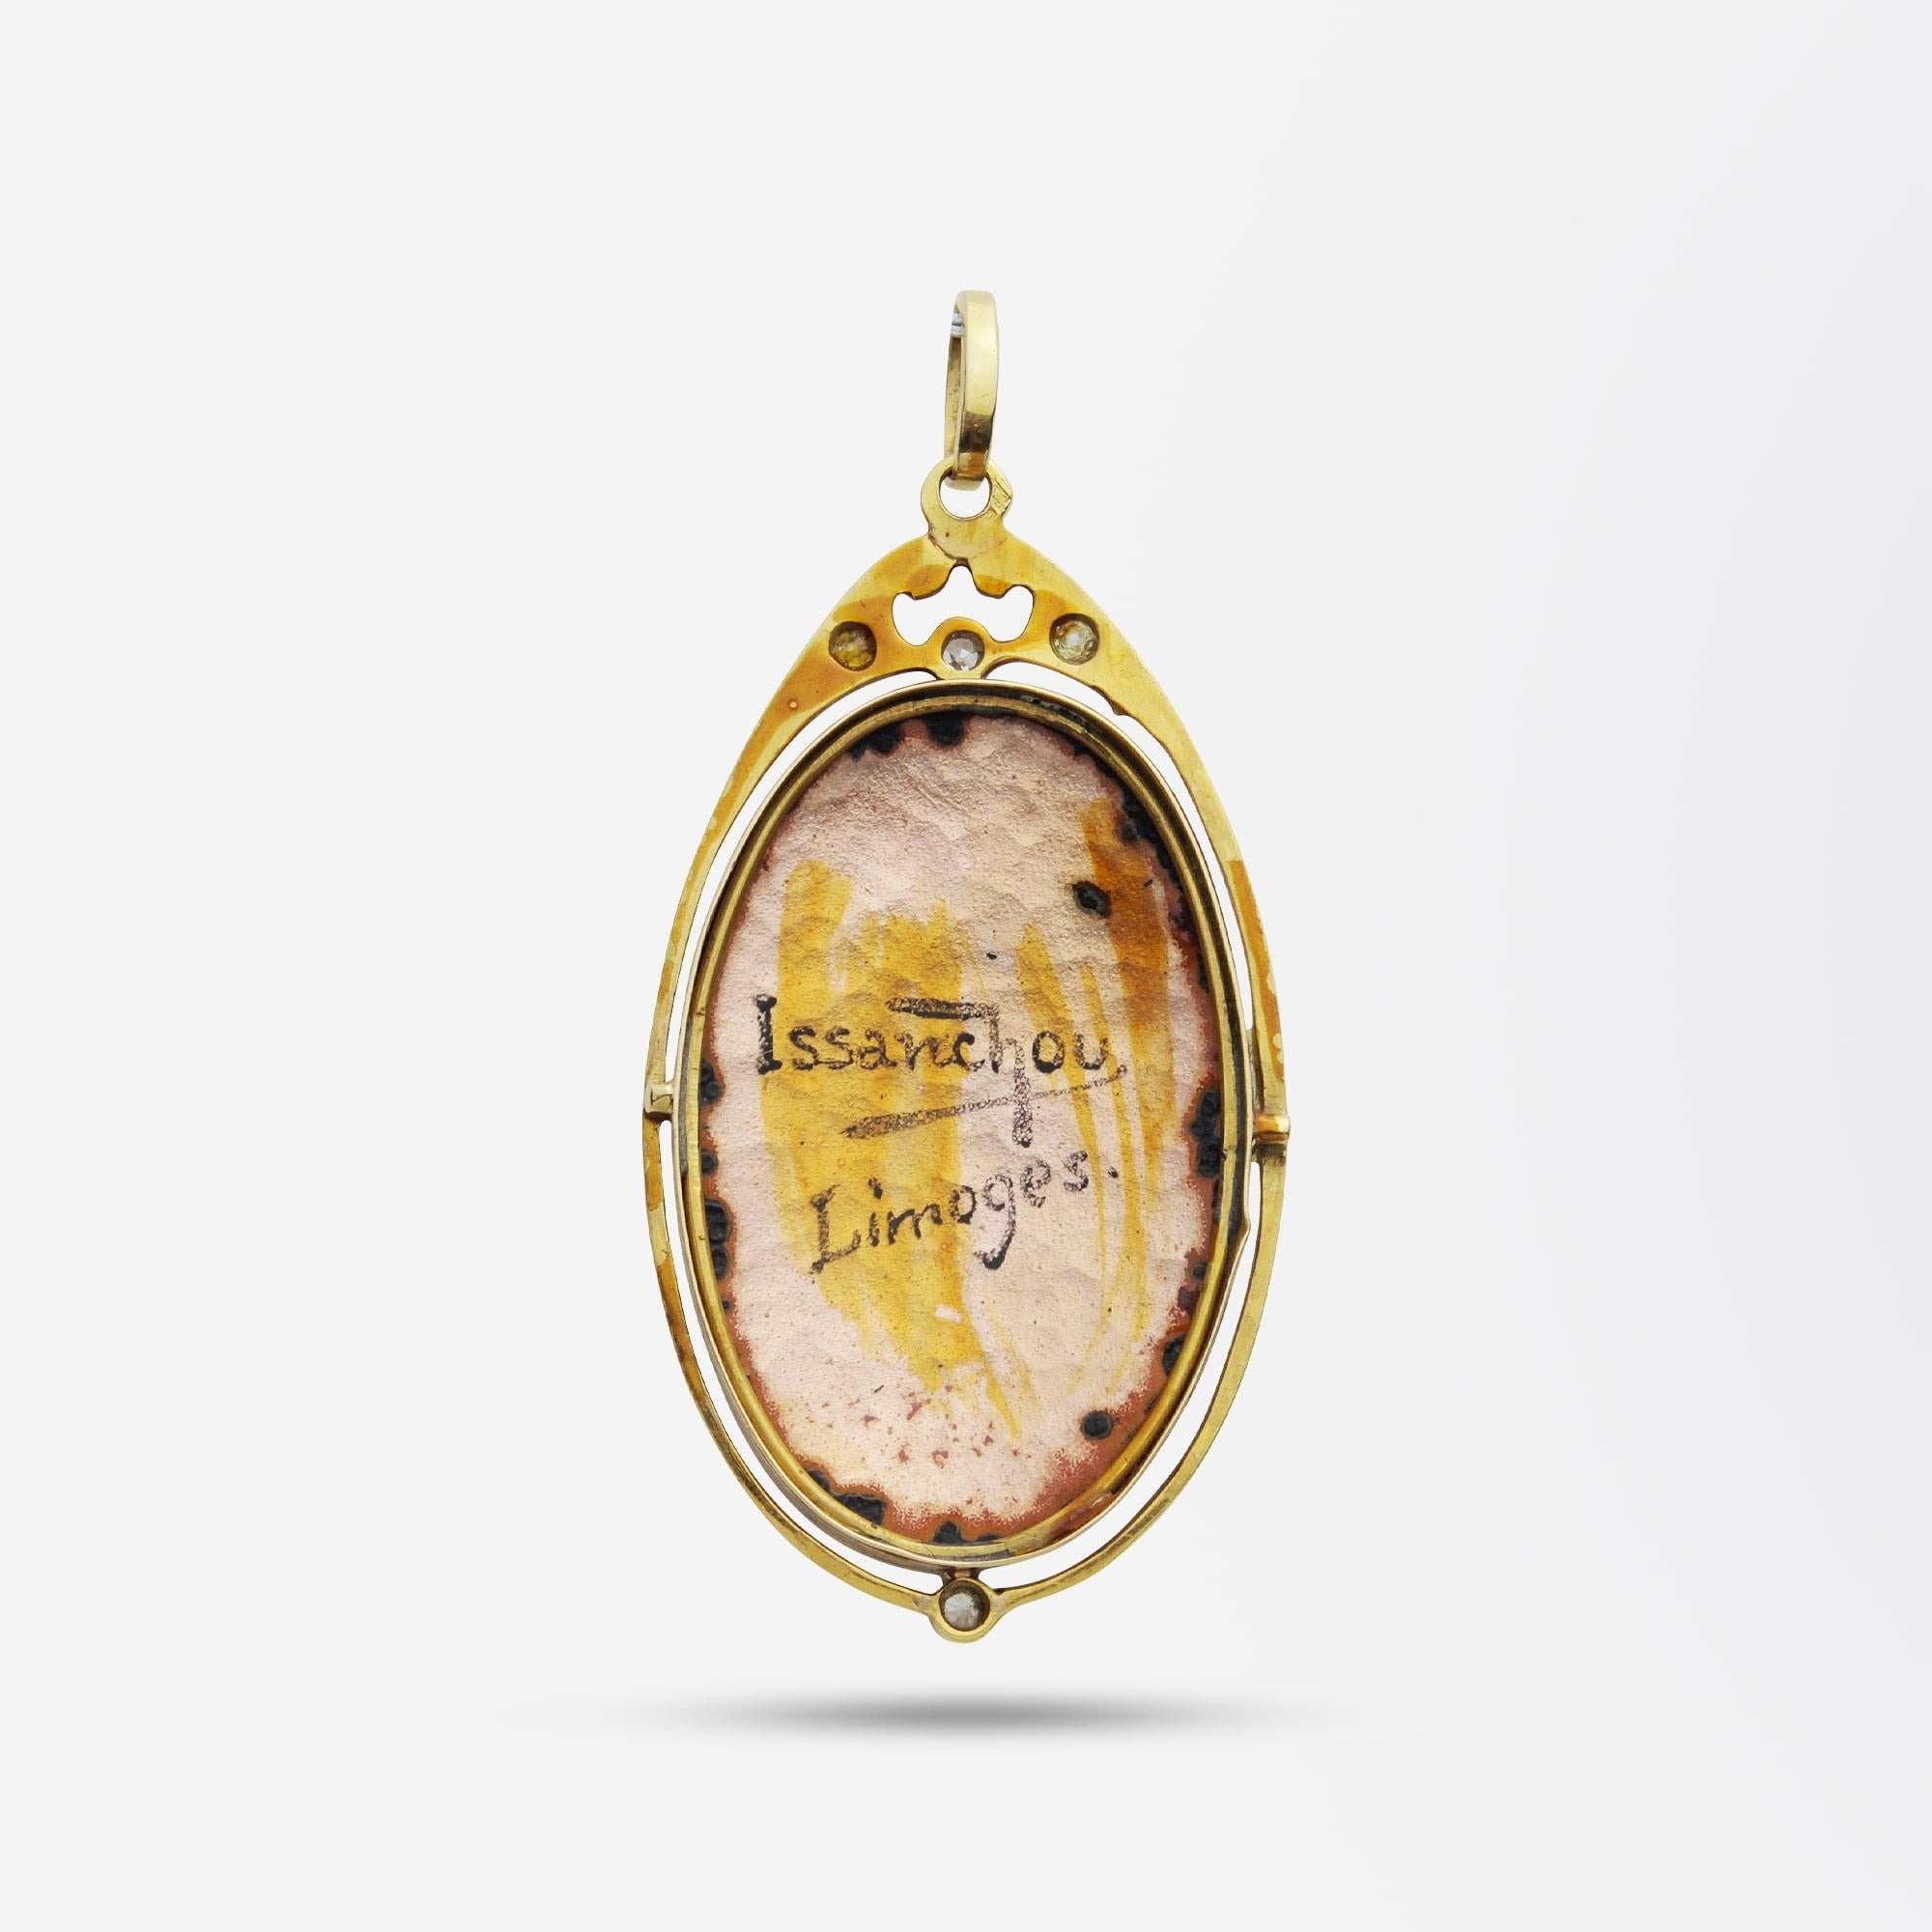 A very fine Art Nouveau enamelled portrait pendant in two tone 14kt gold, set with diamonds. The piece dates to France during the early 20th century at the height of the Art Nouveau movement. The enamelled portrait of a young woman is signed